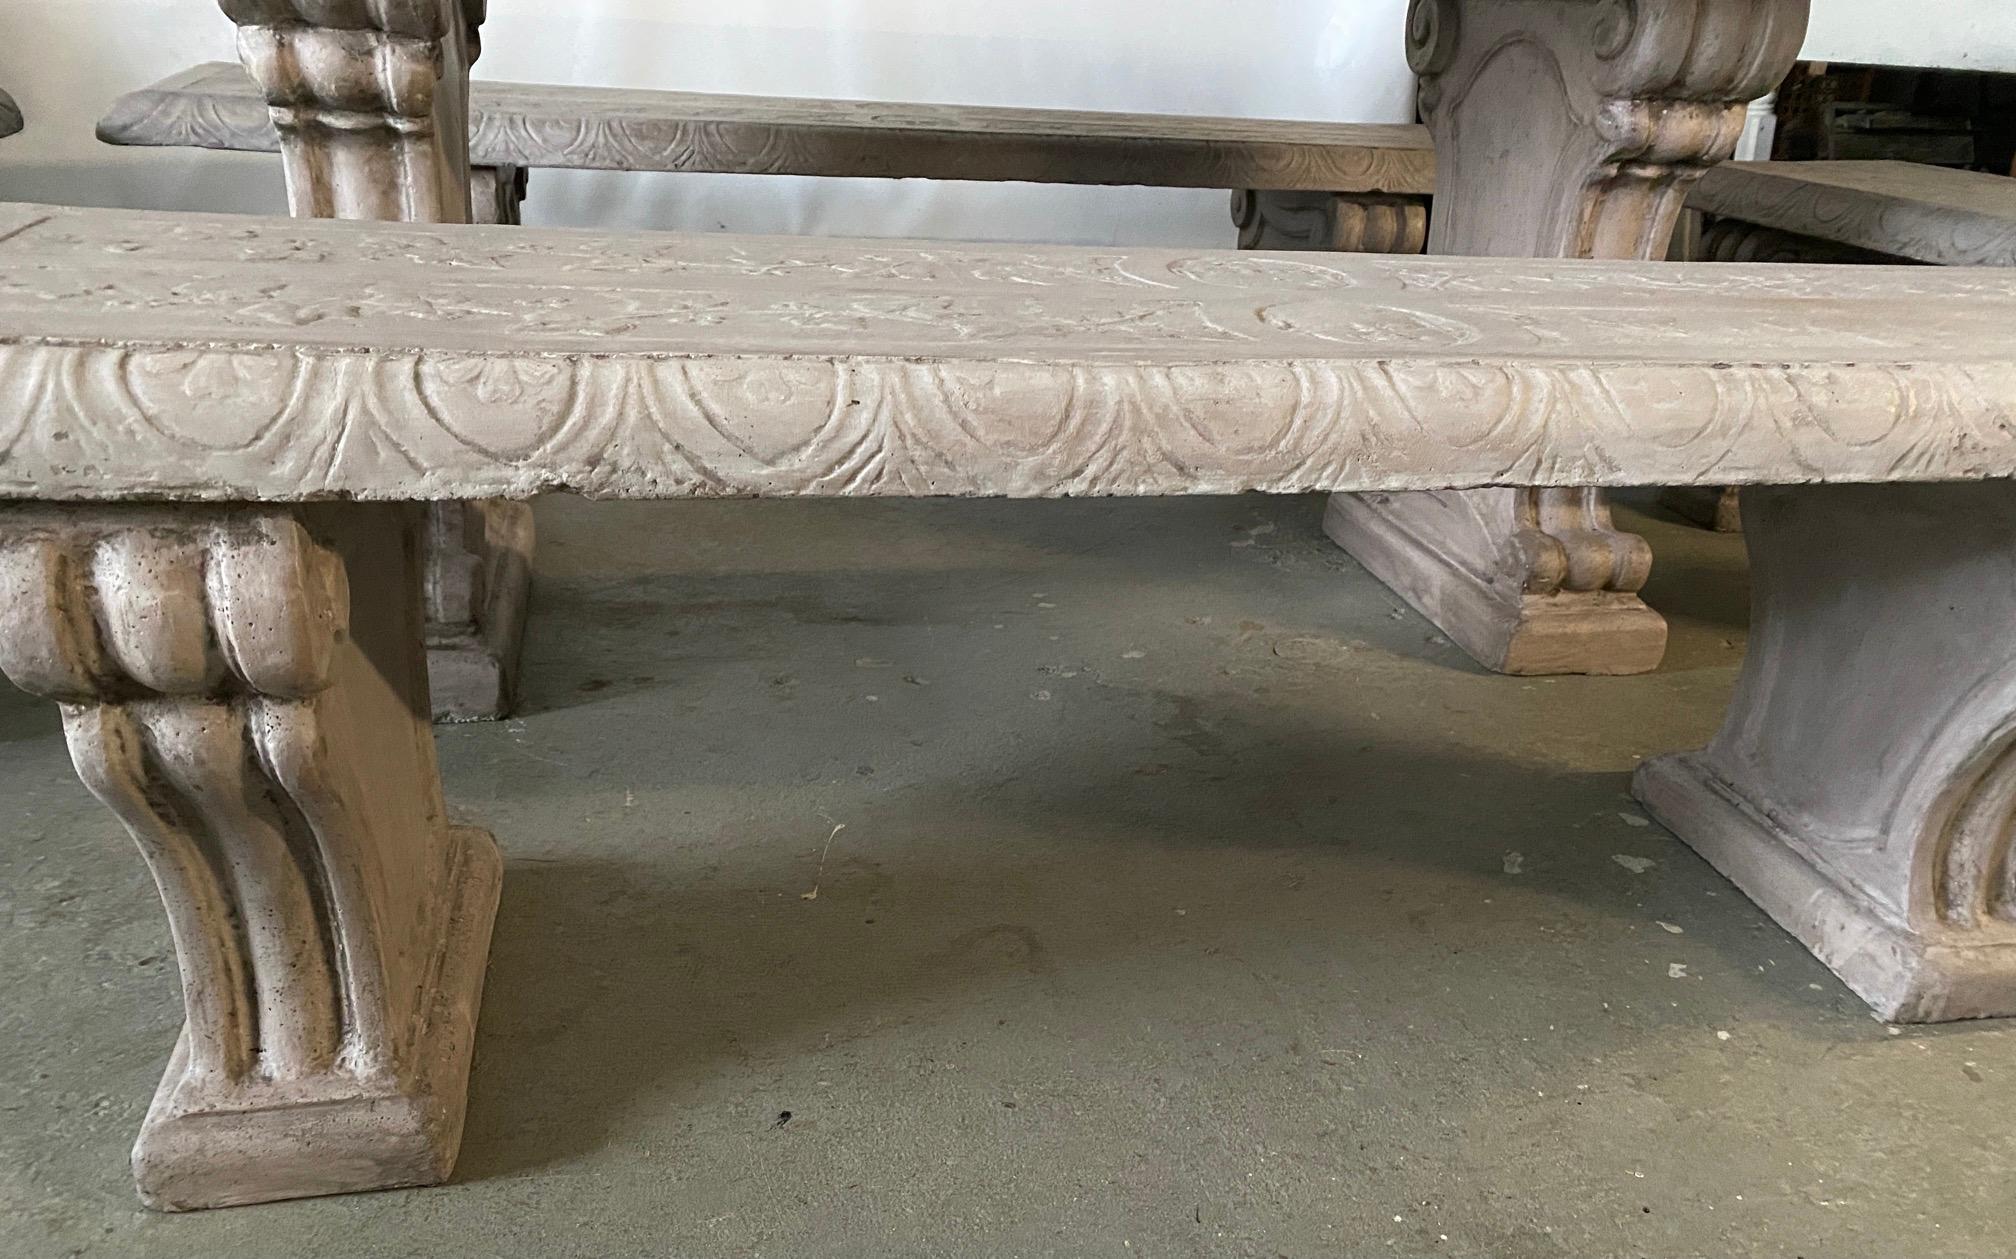 The five pieces include a dining table (two pedestal bases and top), two long benches (two pedestal bases and seat each) and two short benches (two pedestal bases and seat each). The surfaces of the top and seats have etched designs including faces,